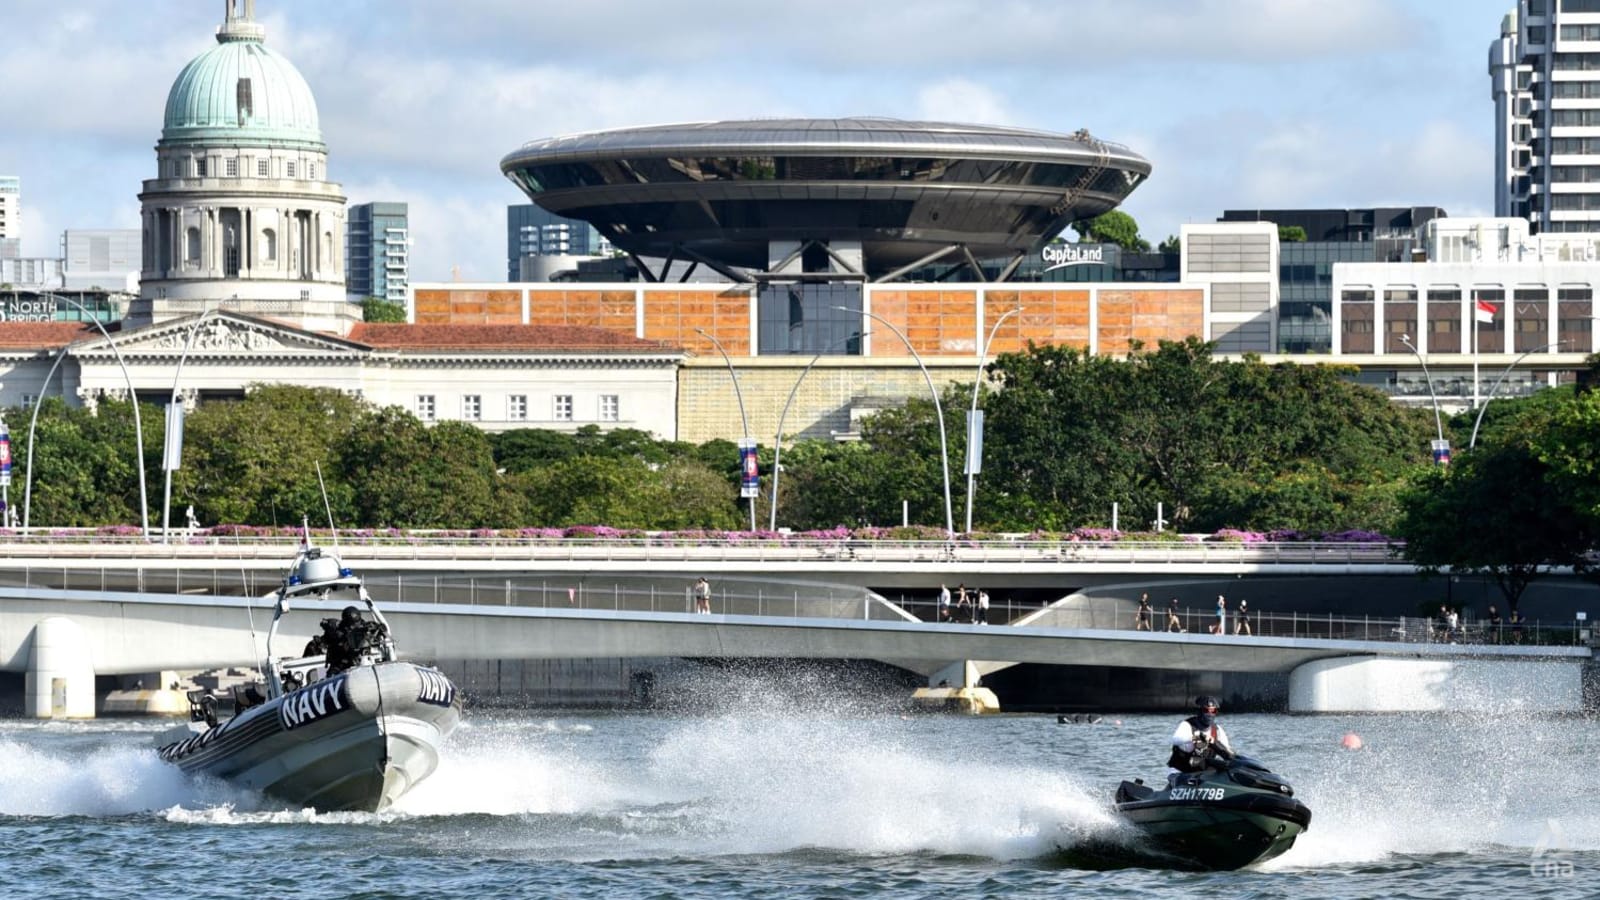 What to expect at NDP: High-speed navy boat chase, divers jumping off Chinook in Marina Bay